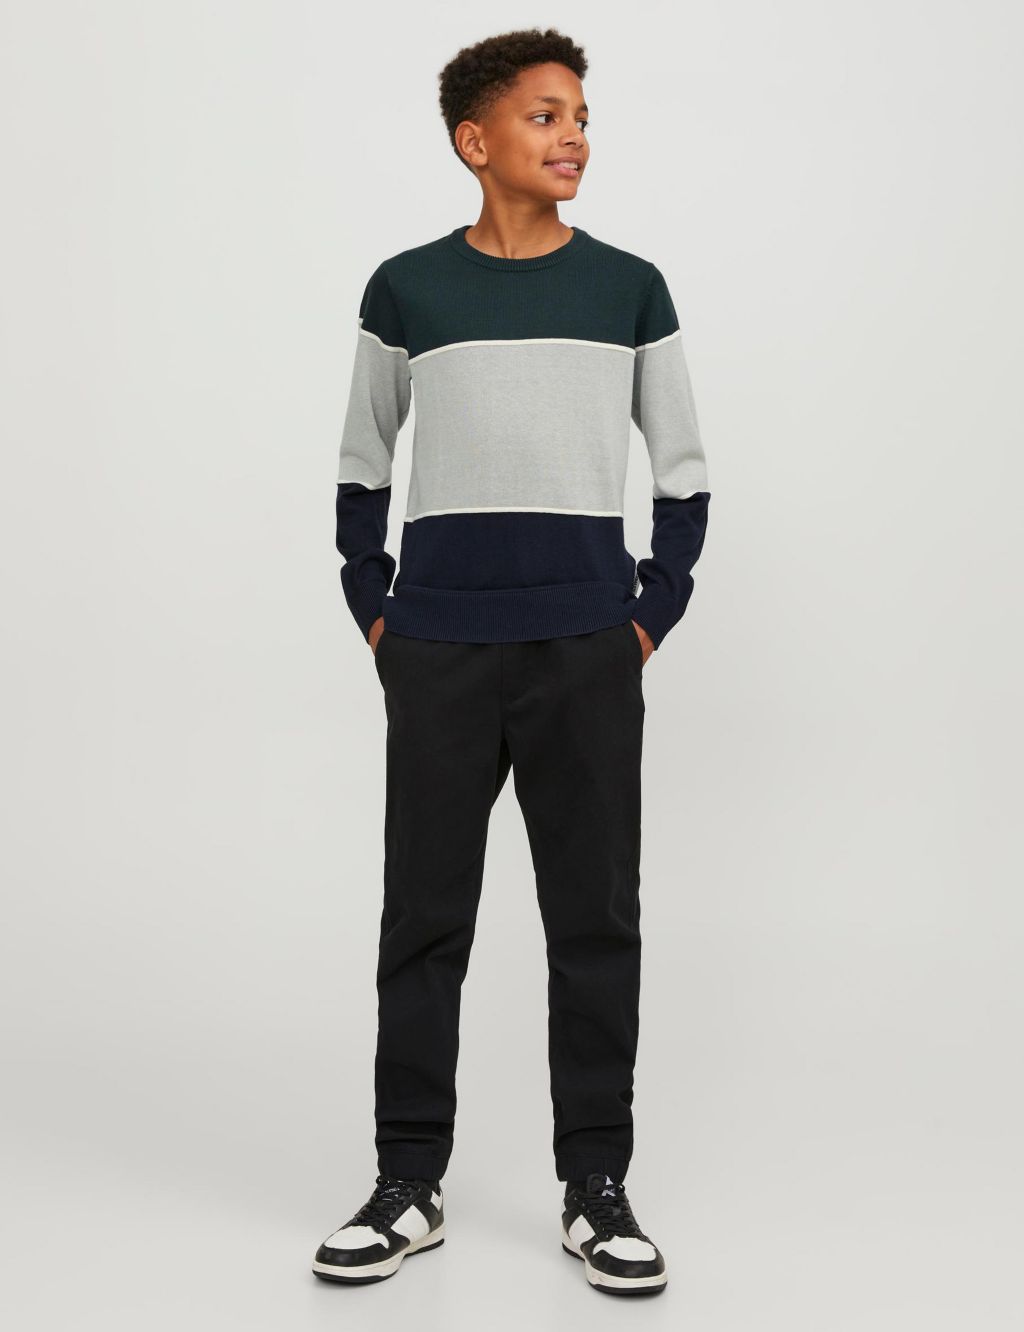 Cotton Blend Colour Block Knitted Jumper (8-16 Yrs) image 4